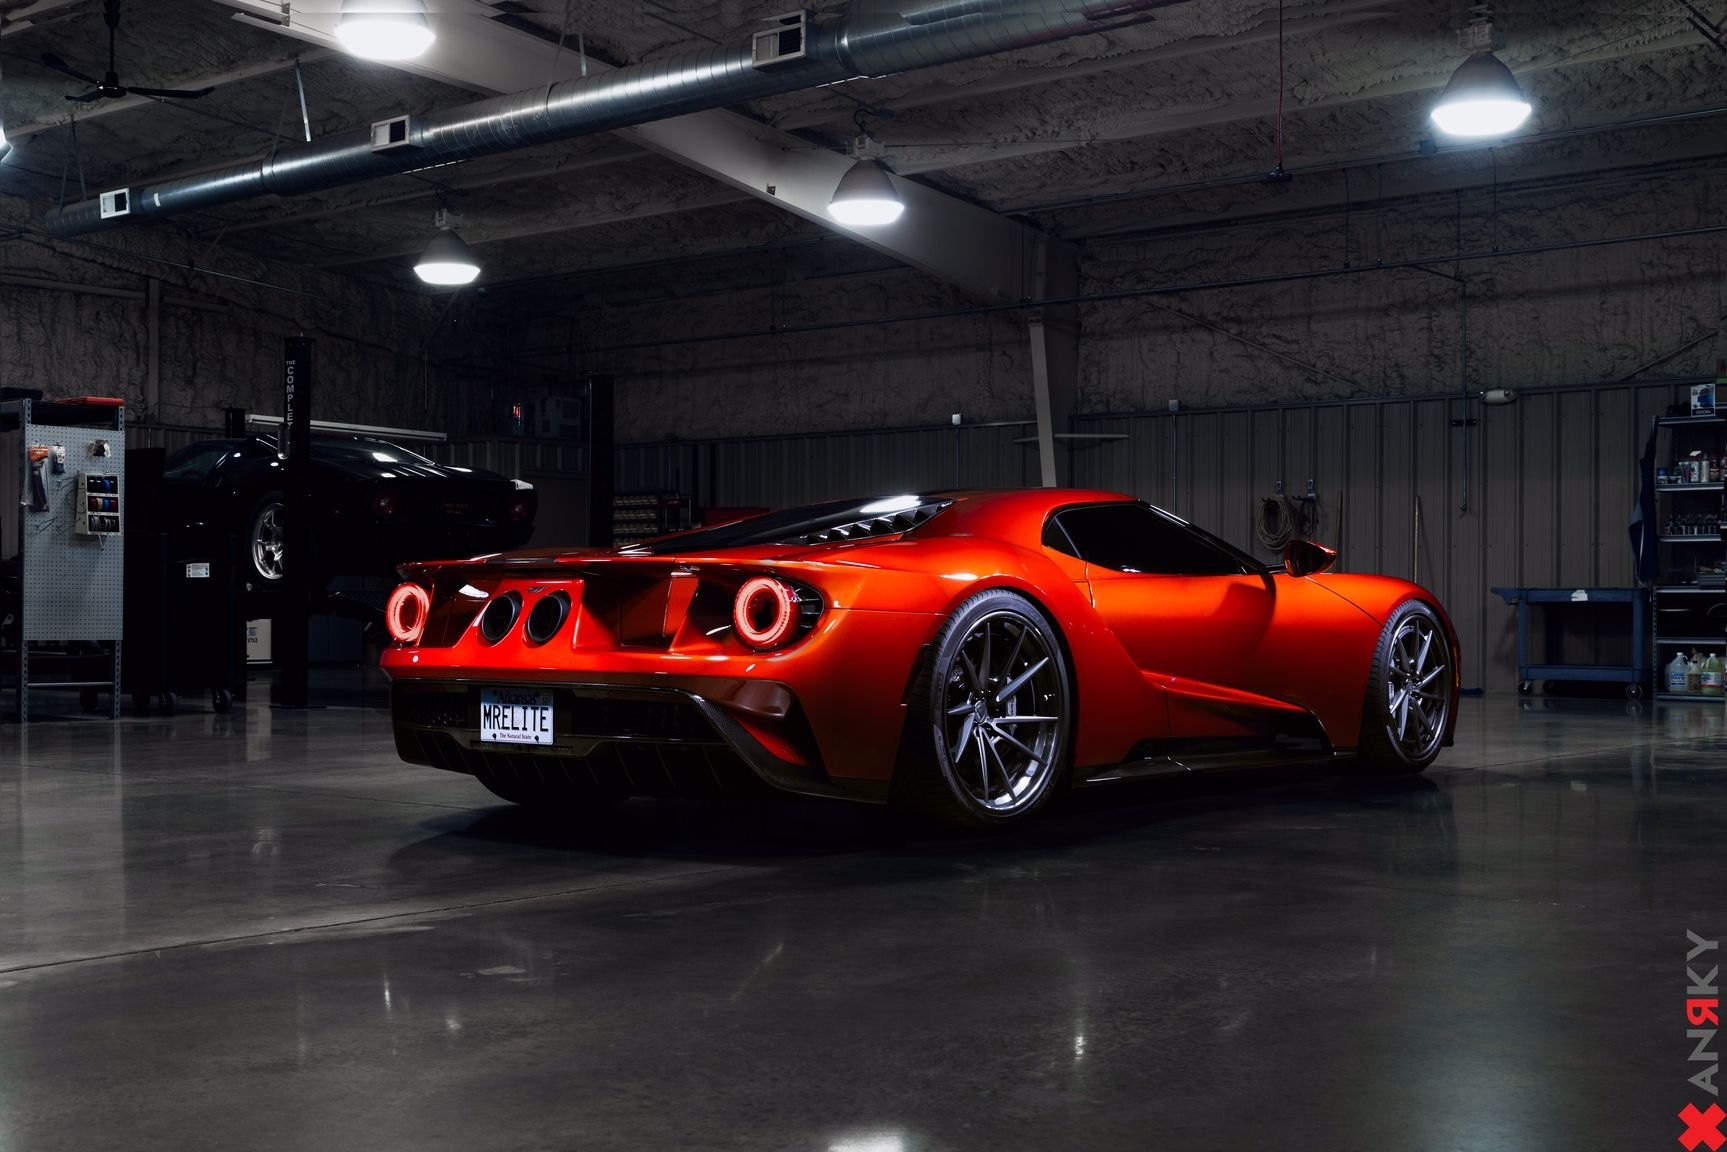 Orange Ford GT with Carbon Fiber Rear Diffuser - Photo by Anrky Wheels